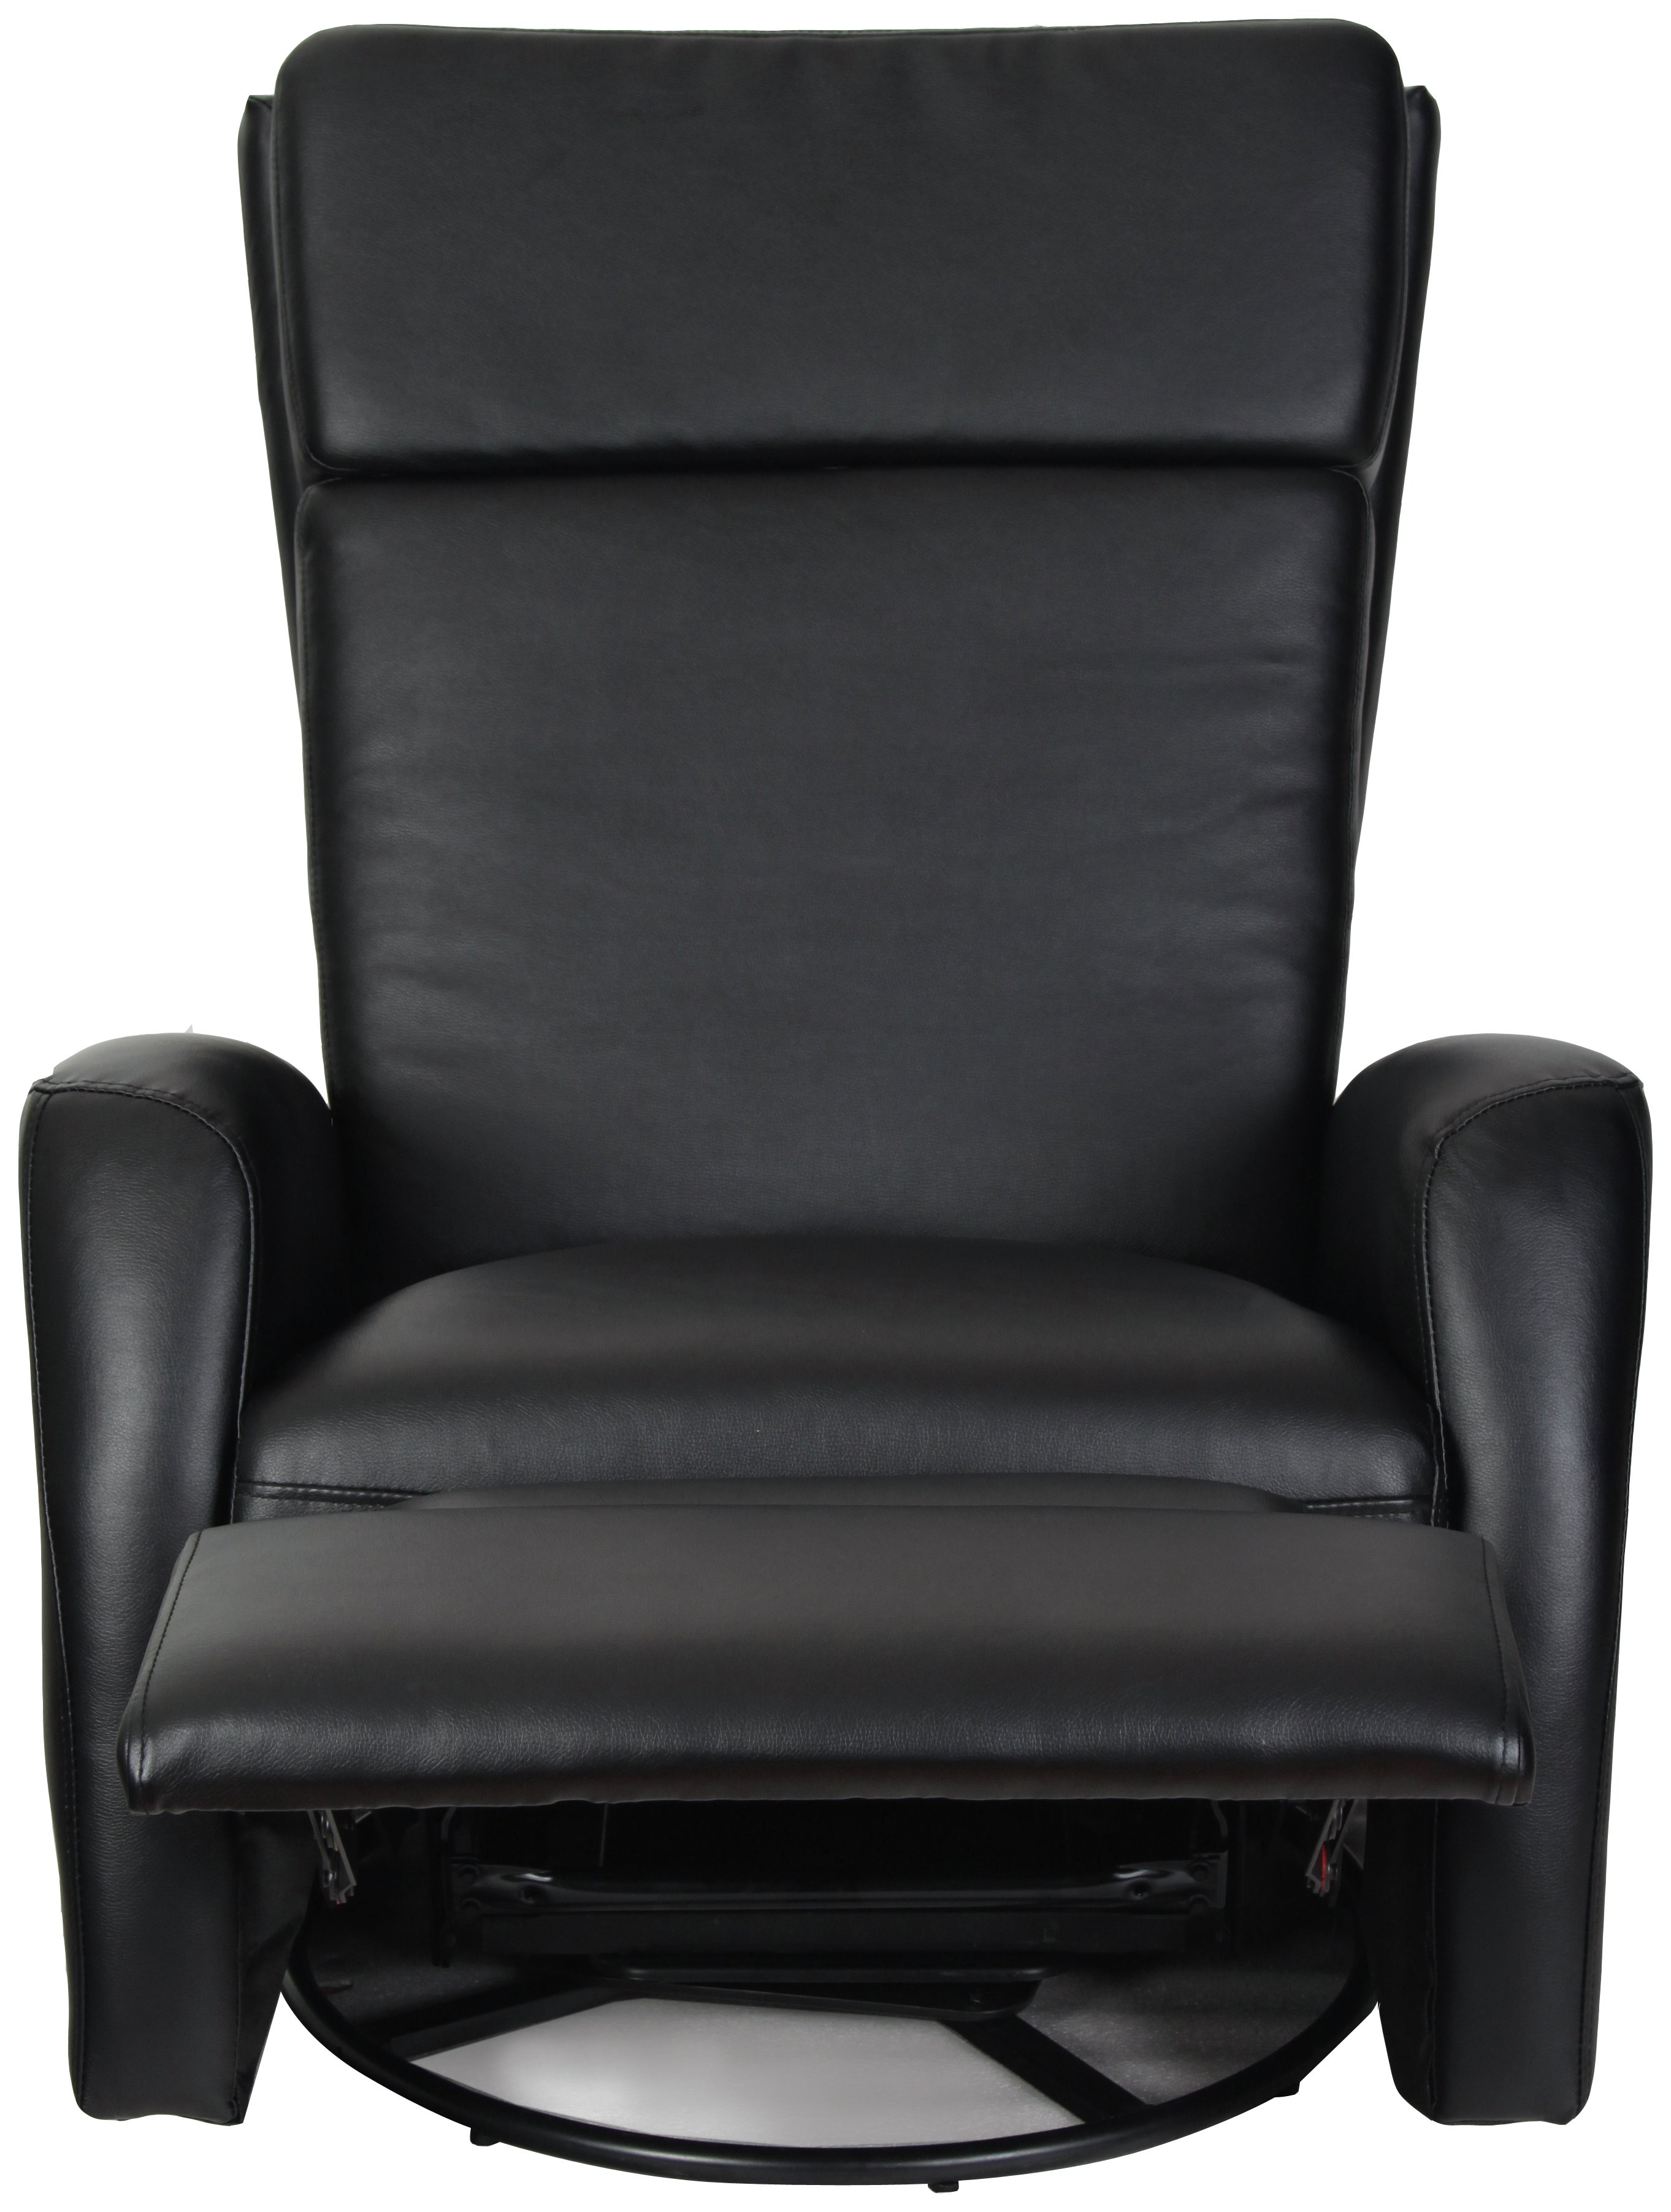 Argos Home Rock-R-Round - Leather Eff - Recliner Chair - Black Reviews